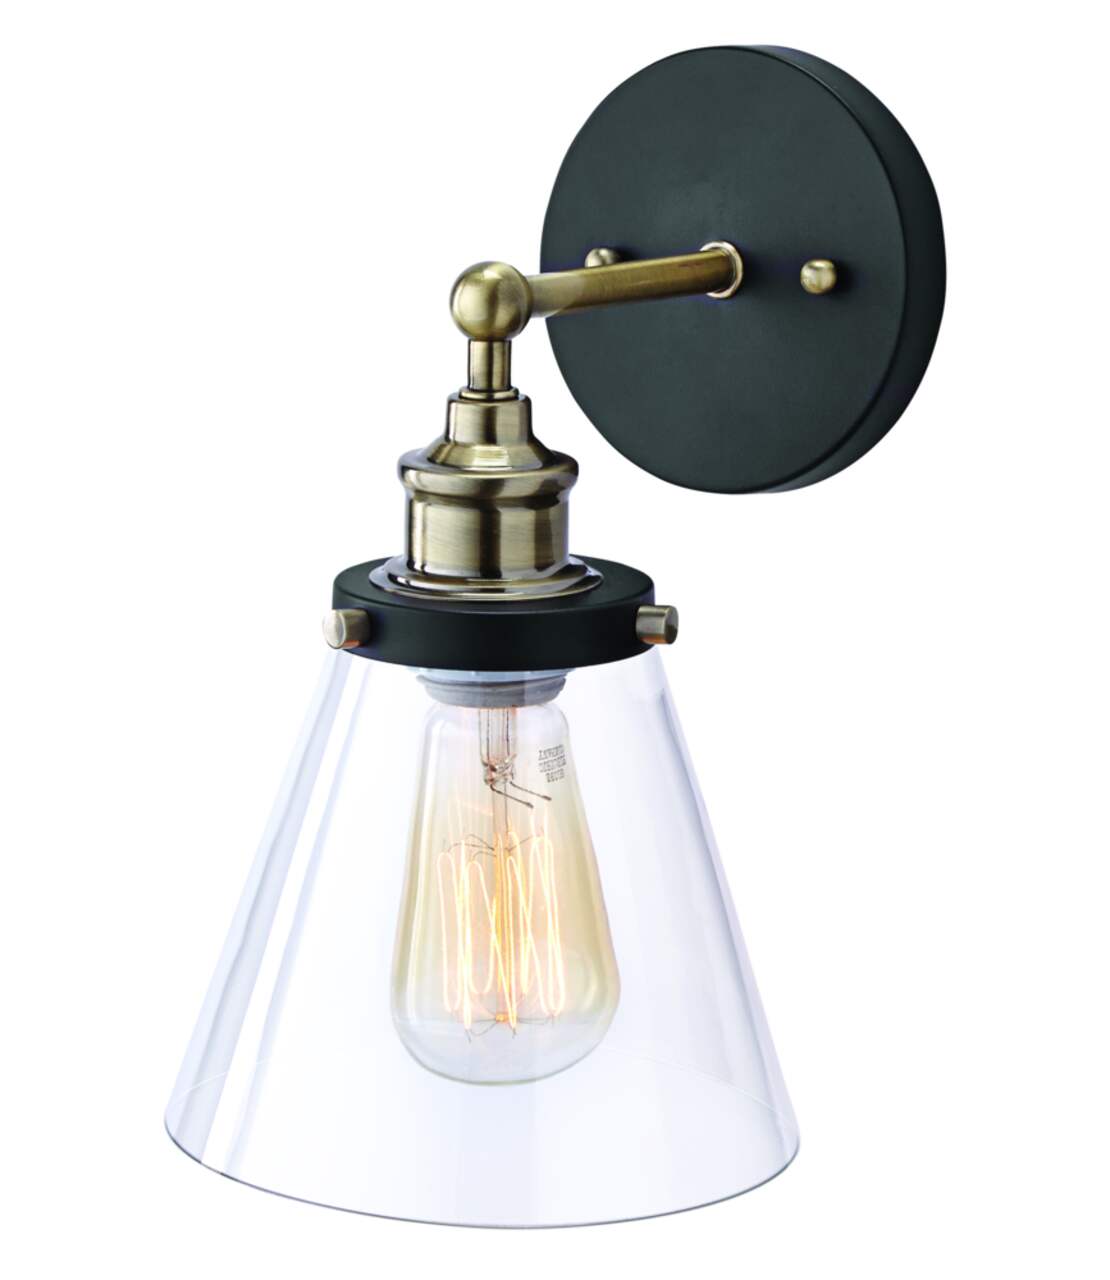 https://media-www.canadiantire.ca/product/living/home-decor/lighting/0527878/canvas-bryant-1-light-sconce-36b77d92-15db-4b17-9391-72b37b794b81.png?imdensity=1&imwidth=1244&impolicy=mZoom